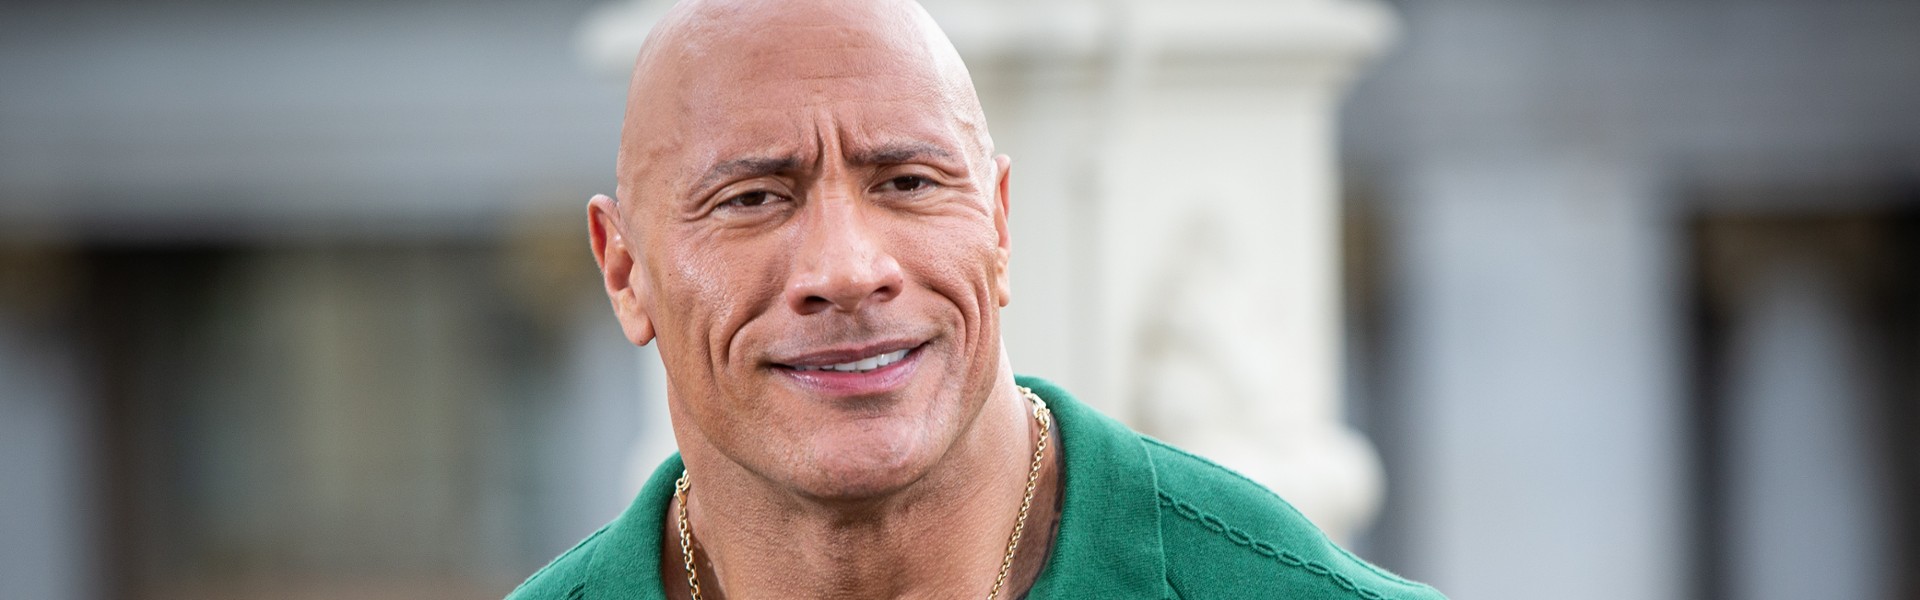 Dwayne Johnson to star in the new film by A24 studio. Behind the camera is Benny Safdie (“Uncut Gems”)